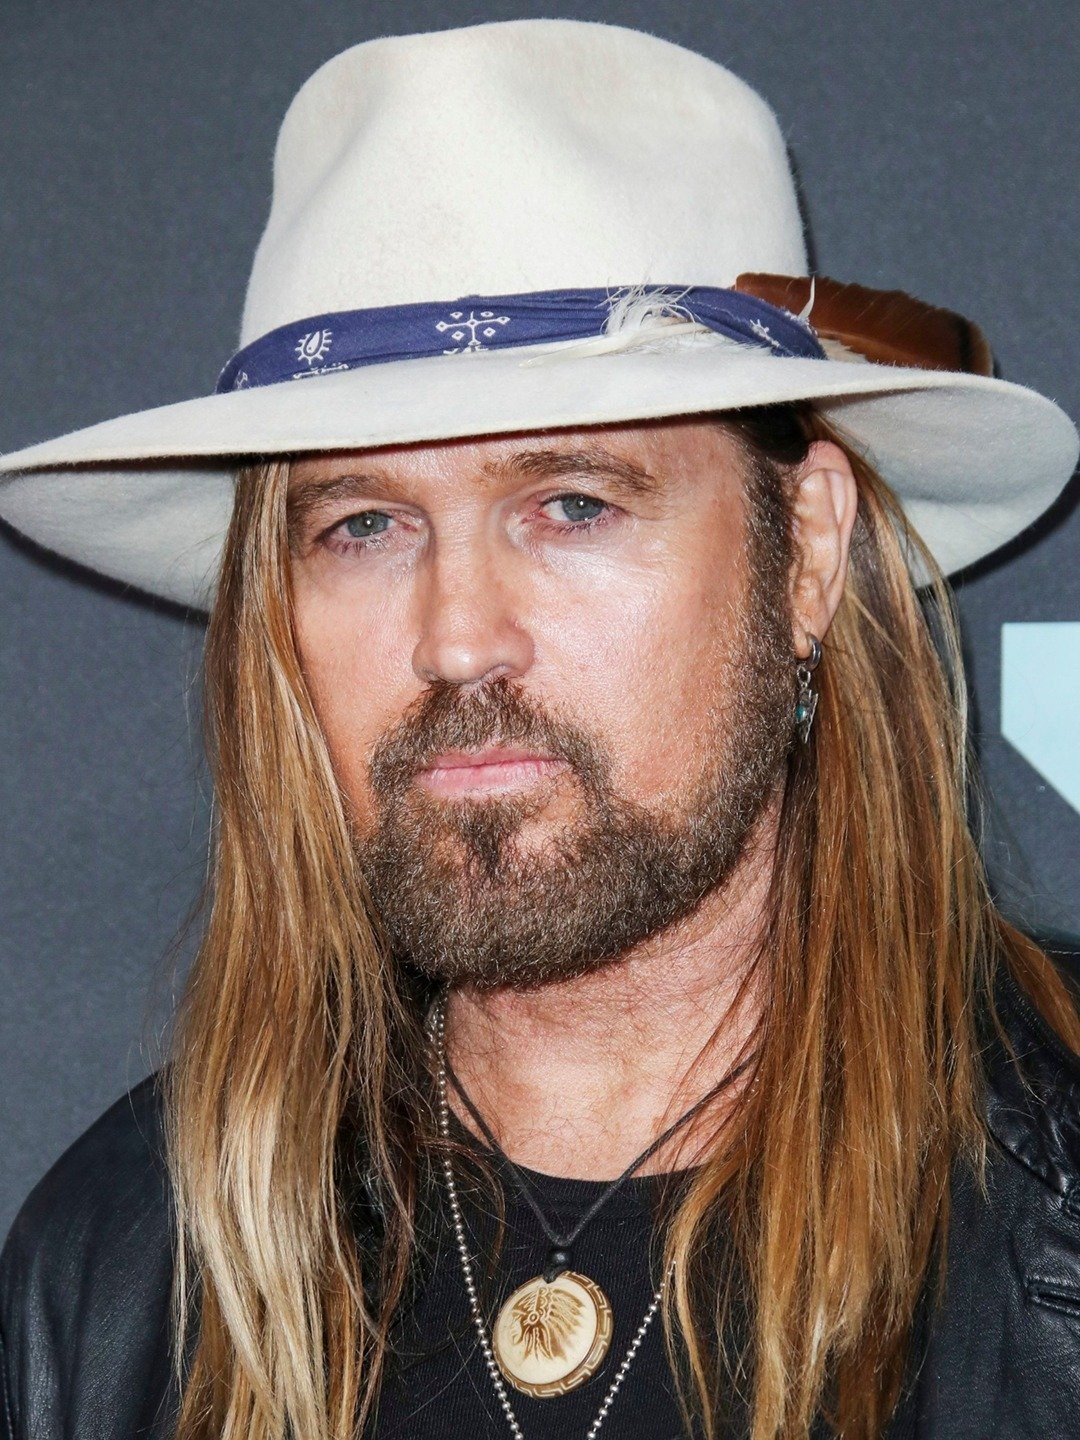 Billy Ray Cyrus's religion in question